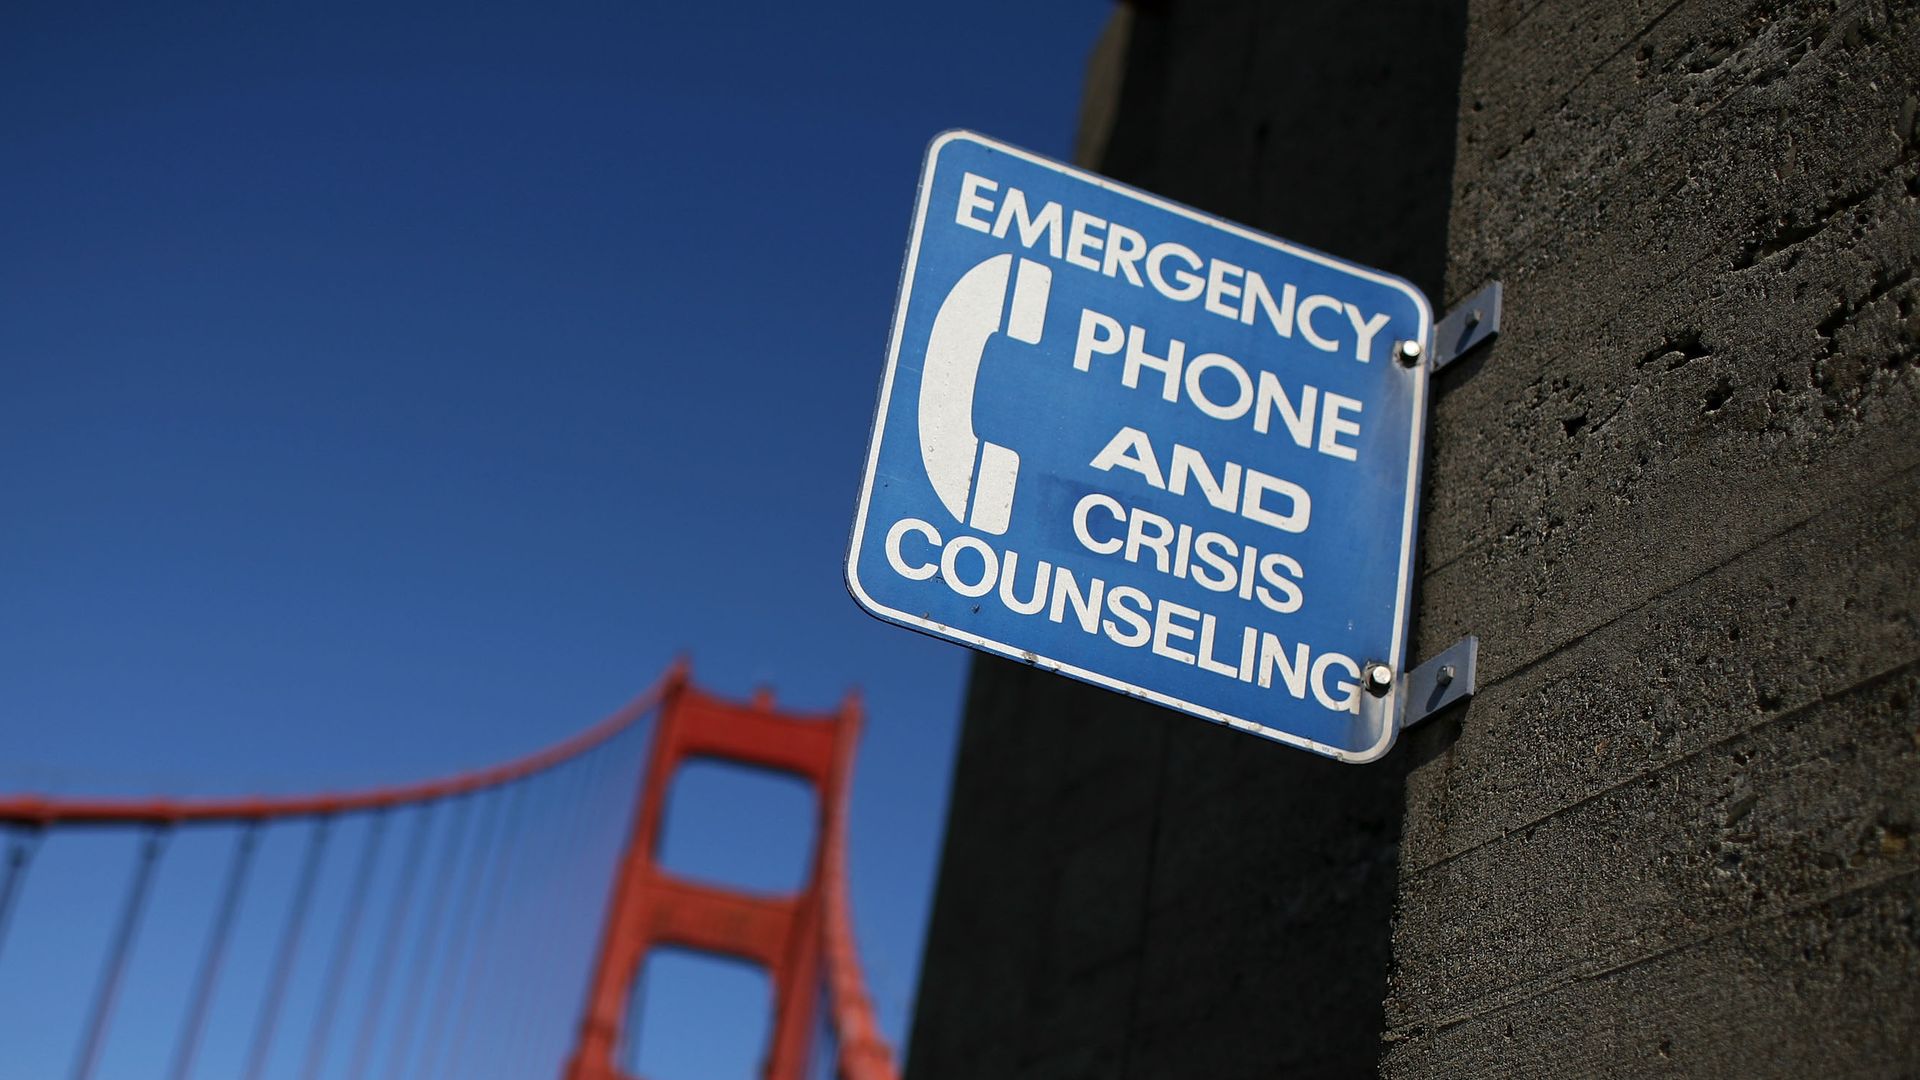  A sign for an emergency phone is seen on a span of the Golden Gate Bridge.